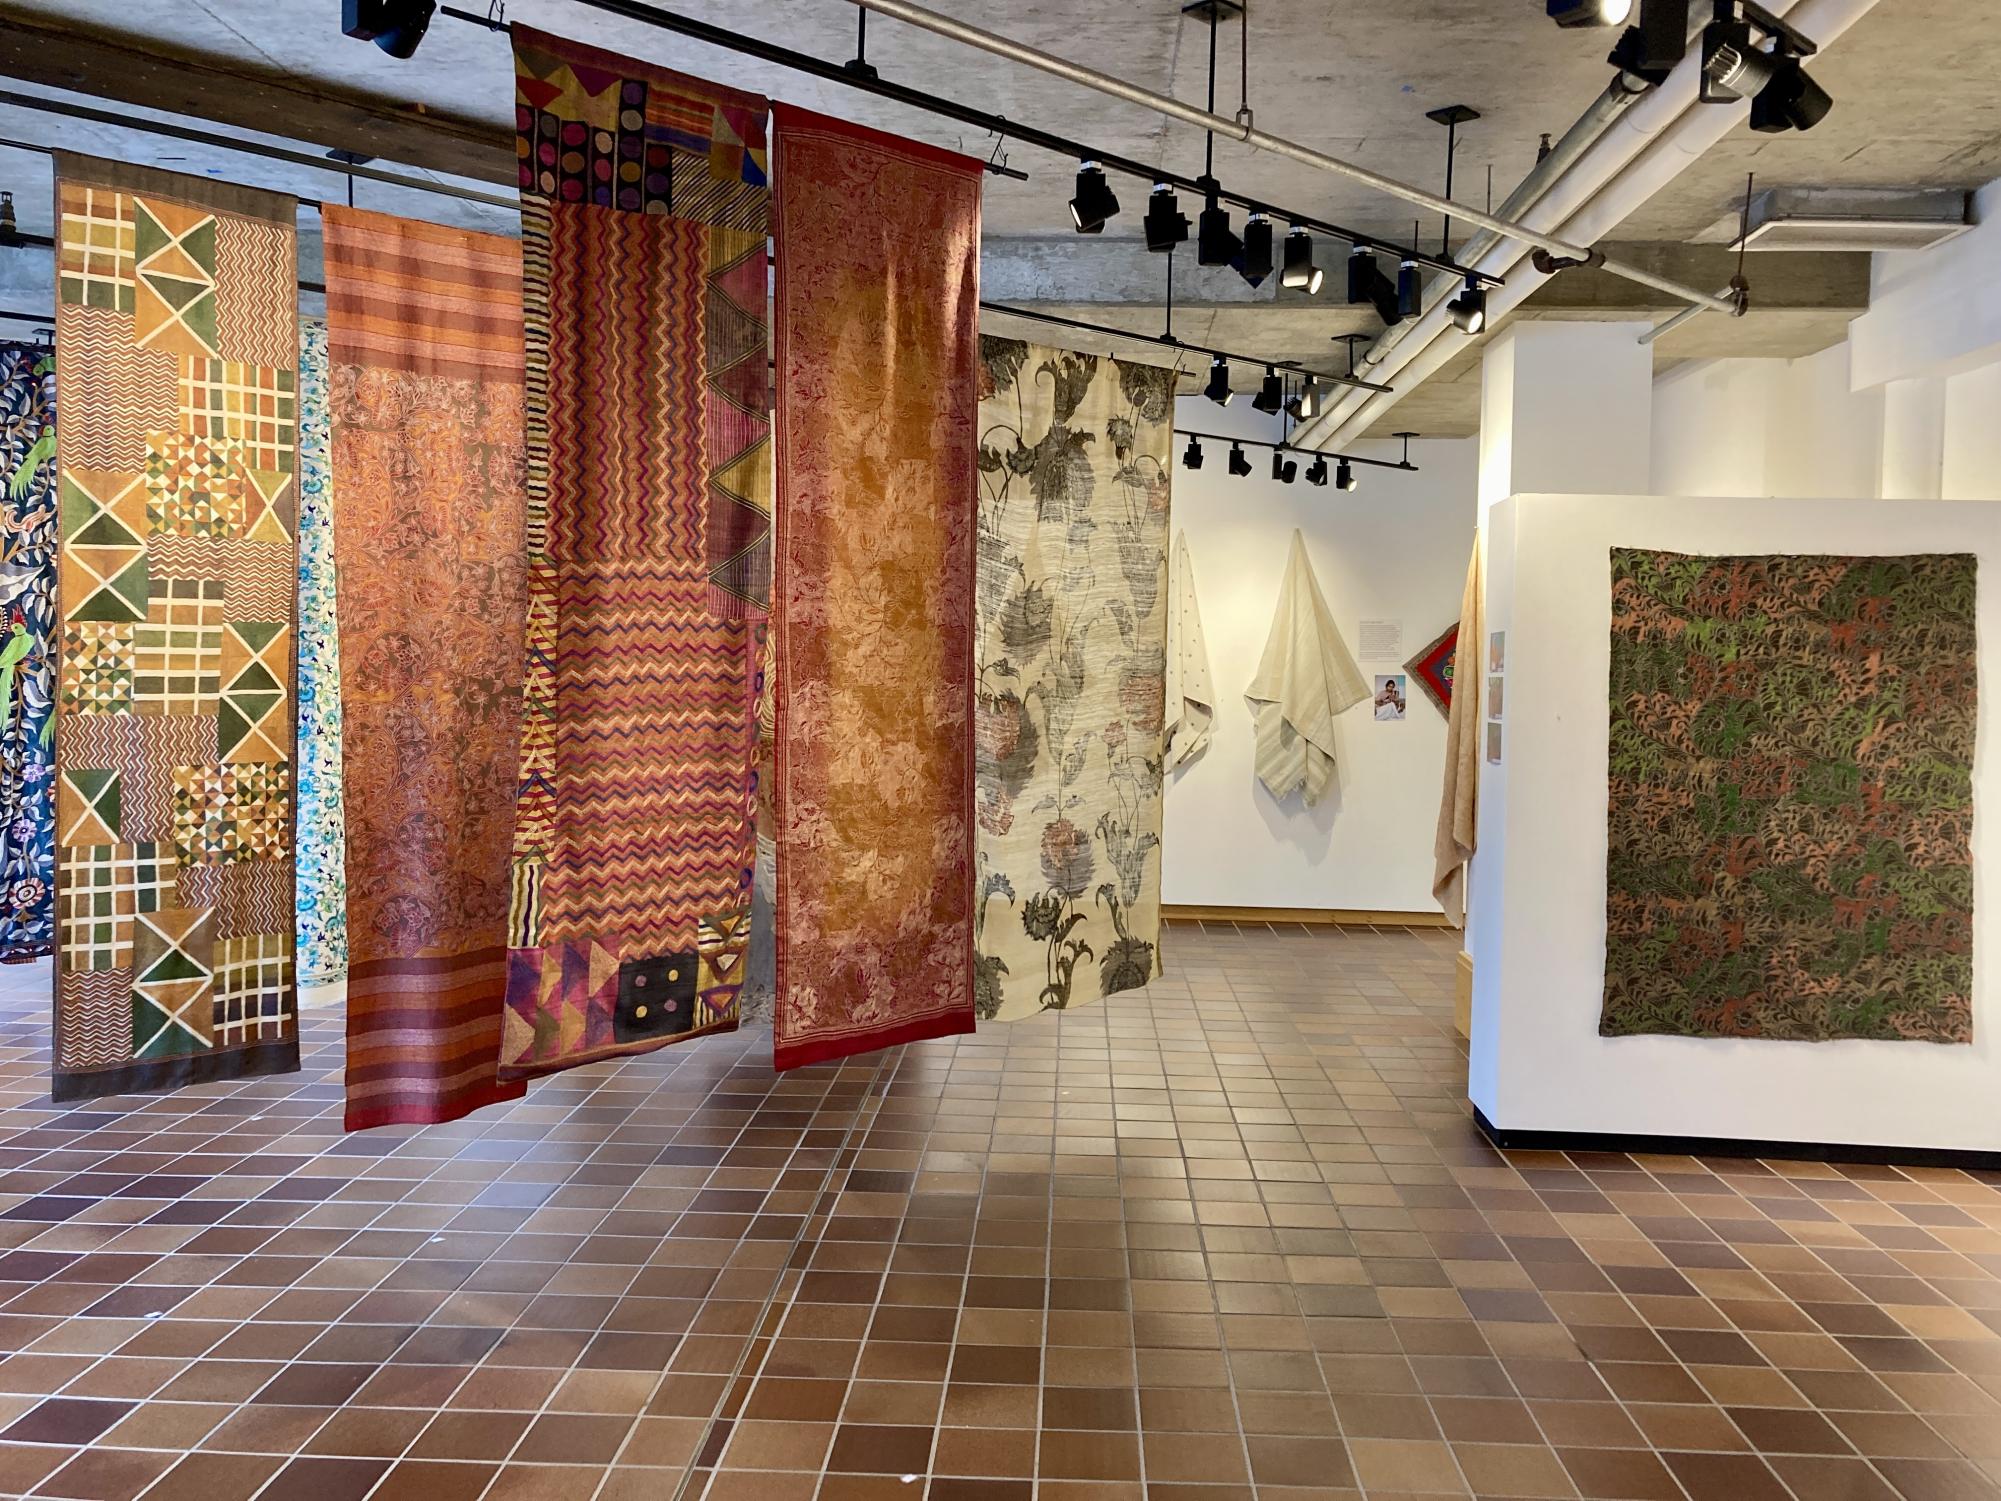 HISTORY. The beautiful textiles now on display in the Drake Art Gallery are filled with history. 10th grade history students have made visits during their classes as they focus on colonial relations in the Indian subcontinent.